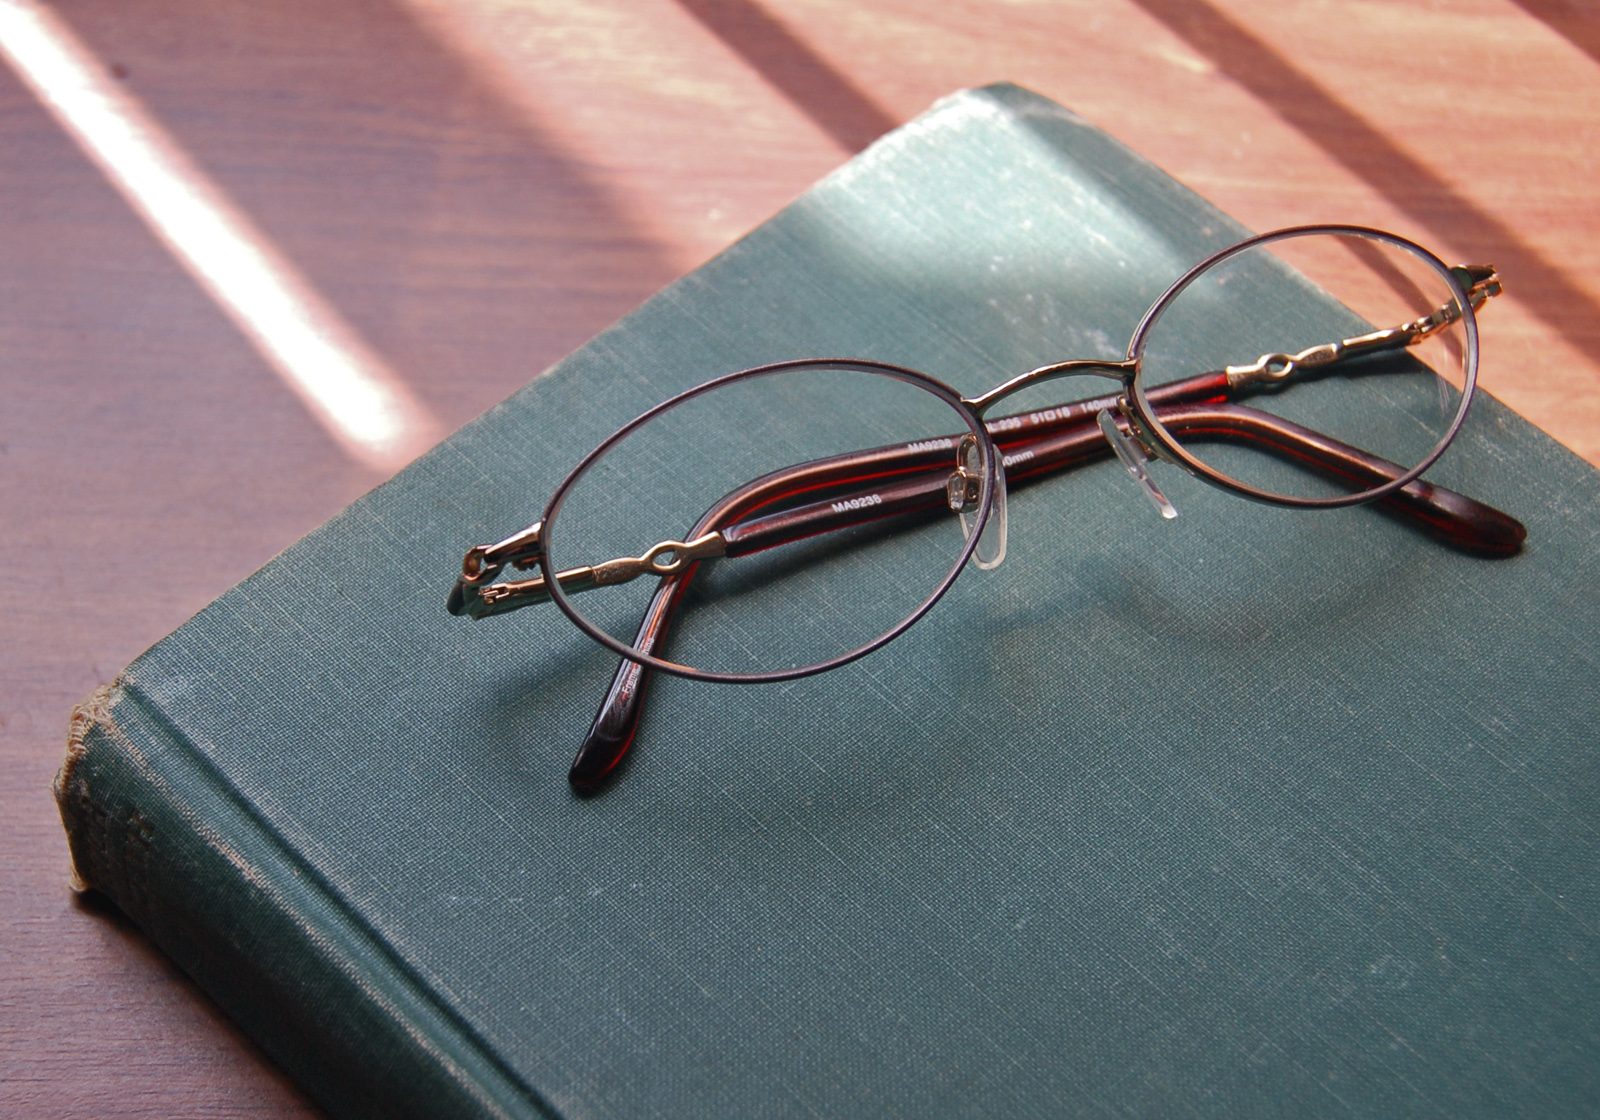 Glasses resting on a closed book